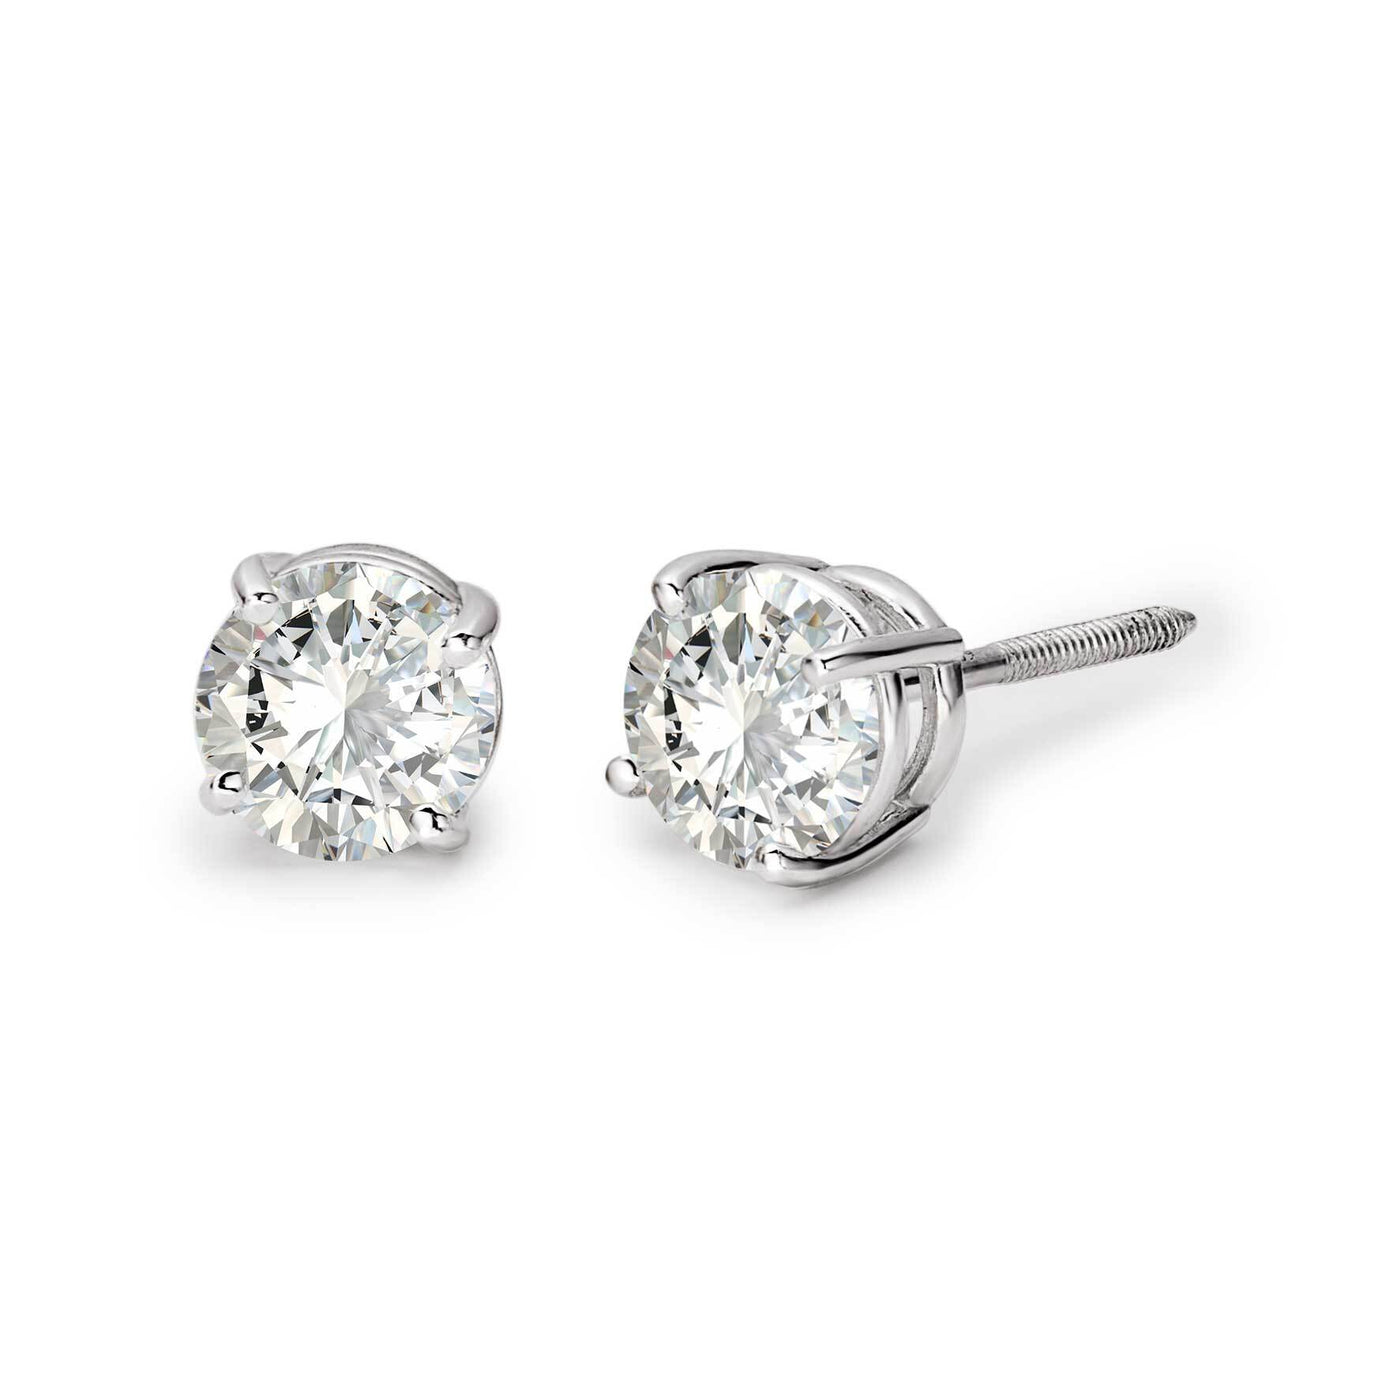 Women's Four Prong Round-Cut Solitaire Diamond Stud Earrings 14K Gold